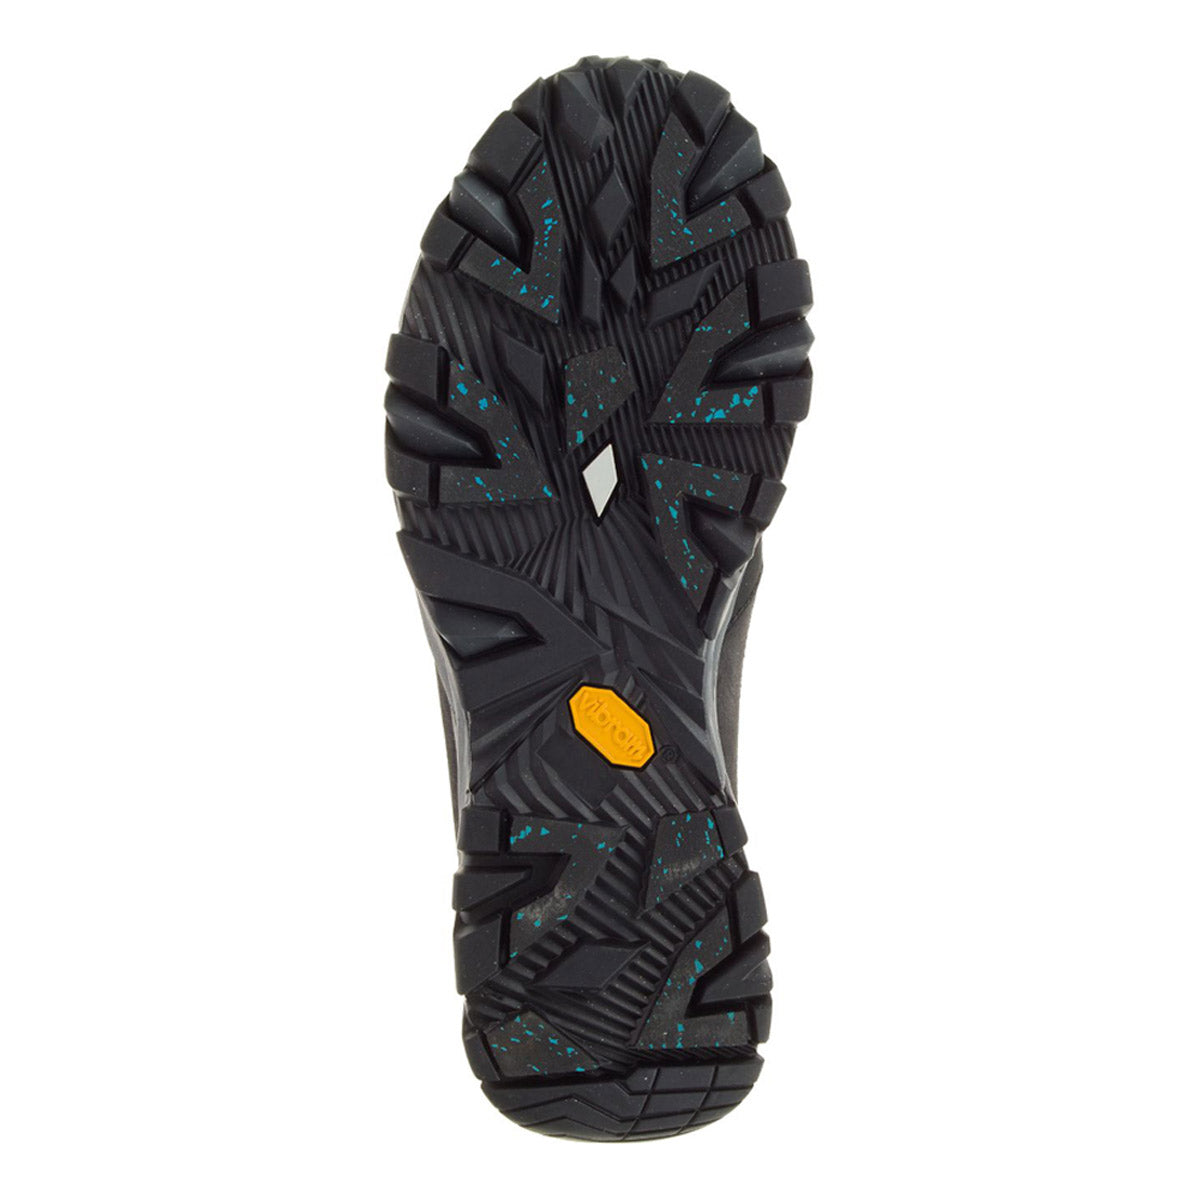 Tread pattern of a MERRELL COLDPACK ICE + MOC WP BLACK - MENS with black and teal details and a yellow brand logo.